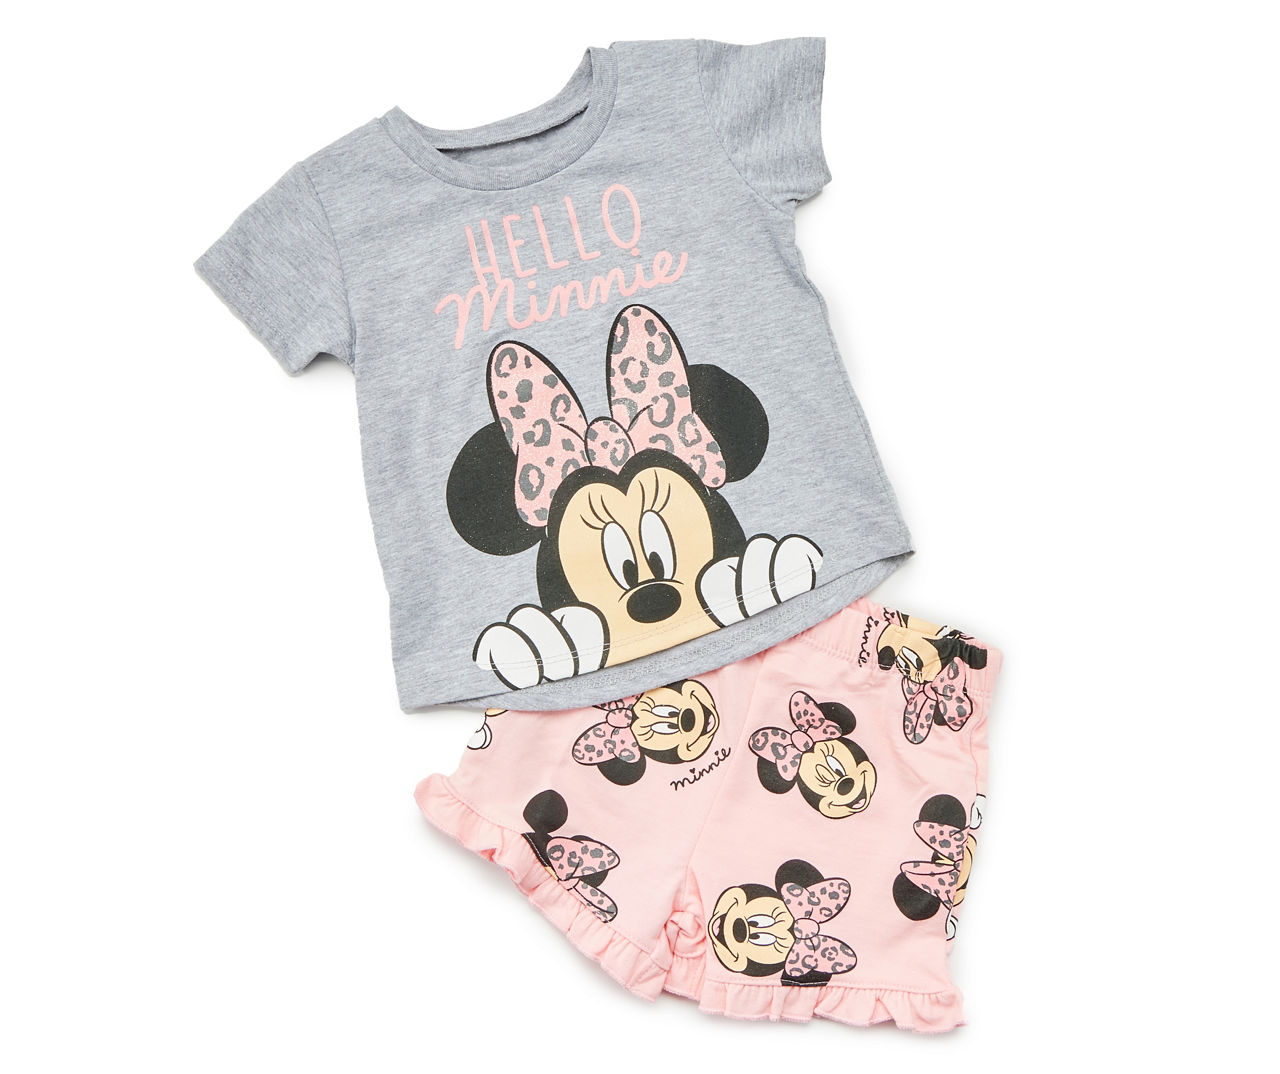 Baby Size 18M "Hello" Gray Minnie Mouse Tee & Pink Patterned Shorts